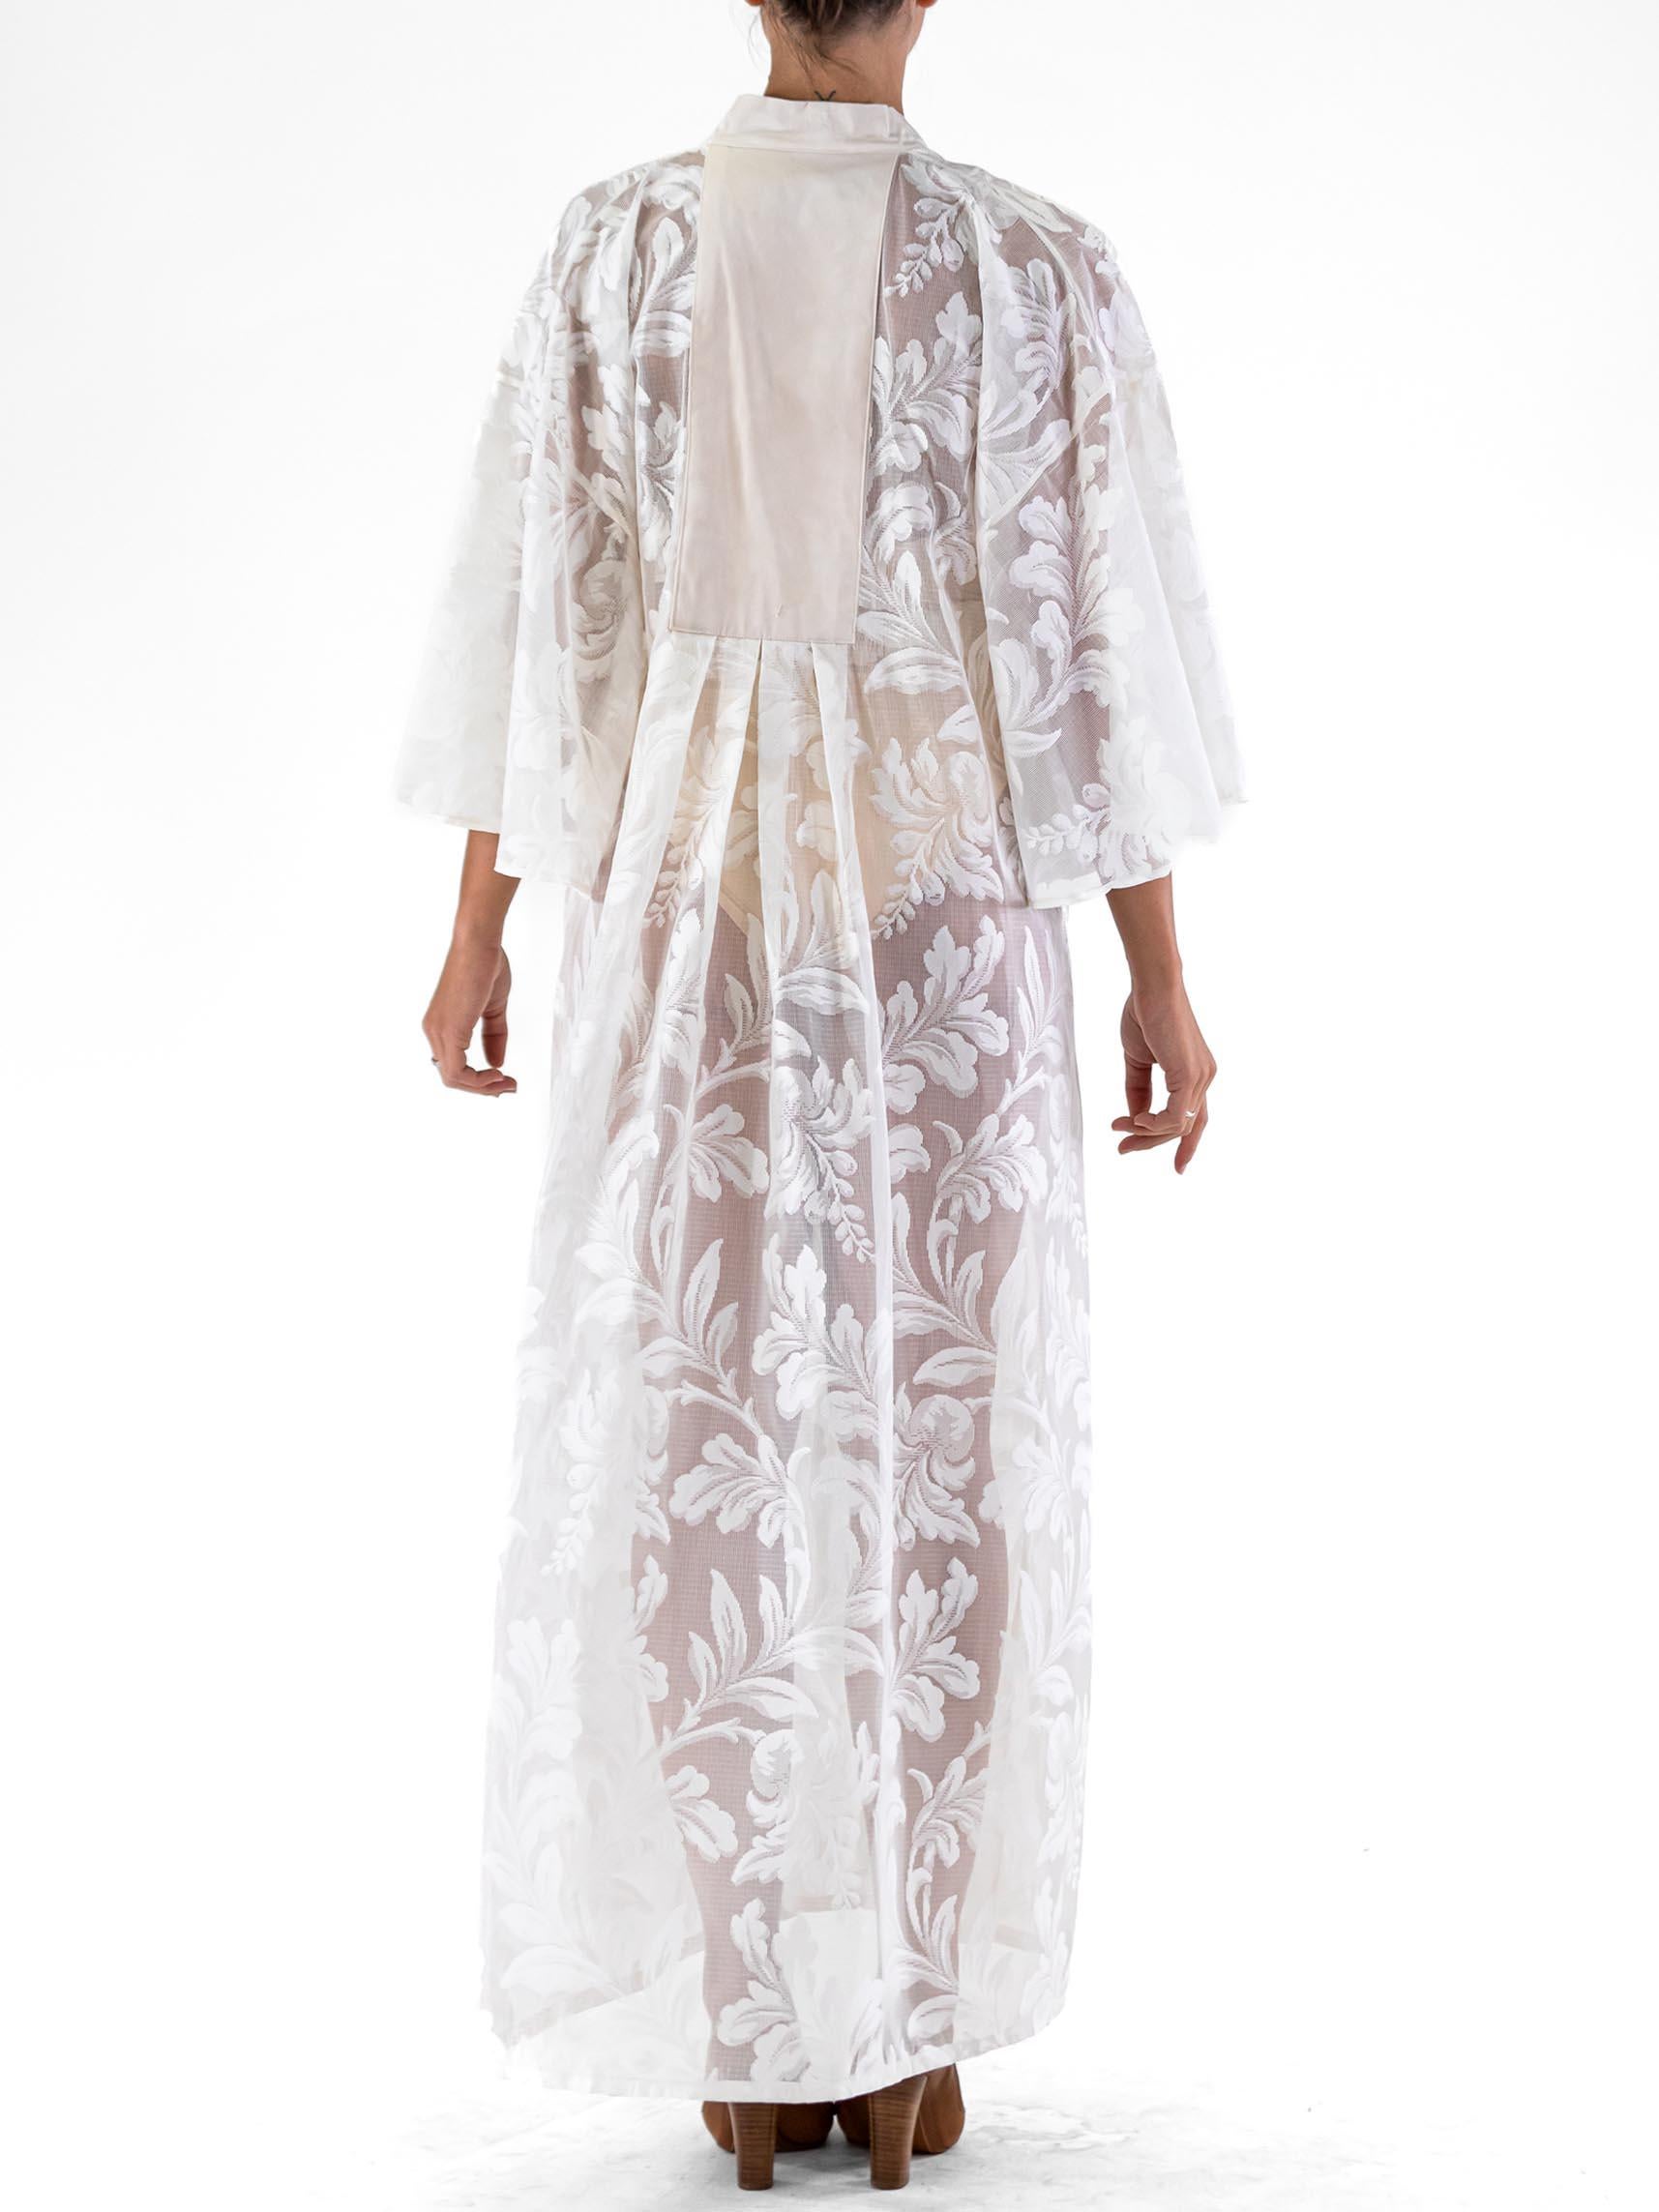 MORPHEW COLLECTION White Poly/Nylon Baroque Leaf Lace Kaftan In Excellent Condition For Sale In New York, NY